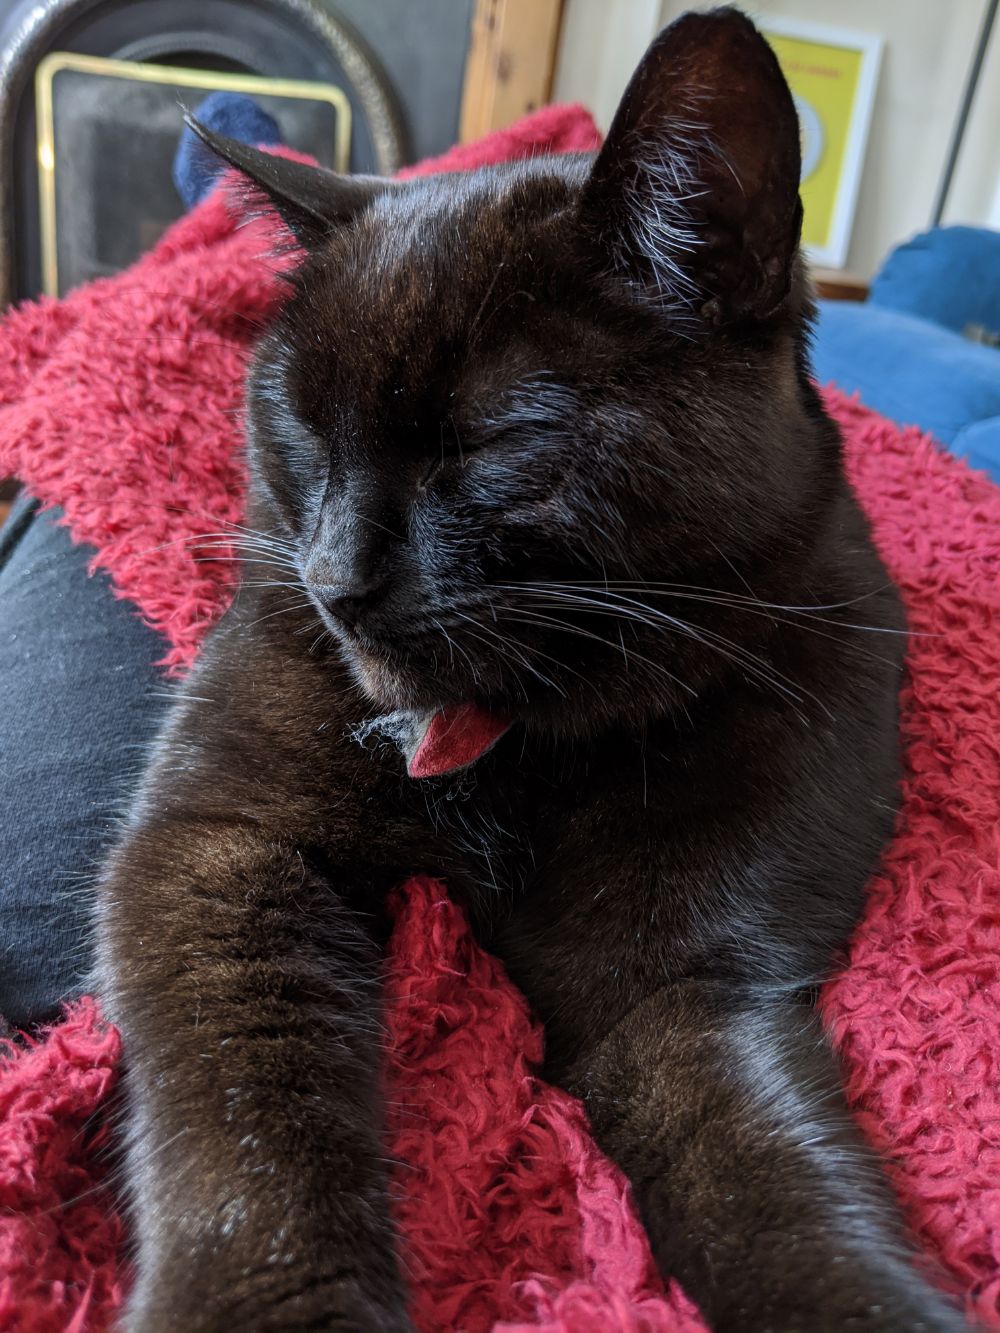 Black cat sitting up, in snuggle valley, facing the camera, looking content and sleepy